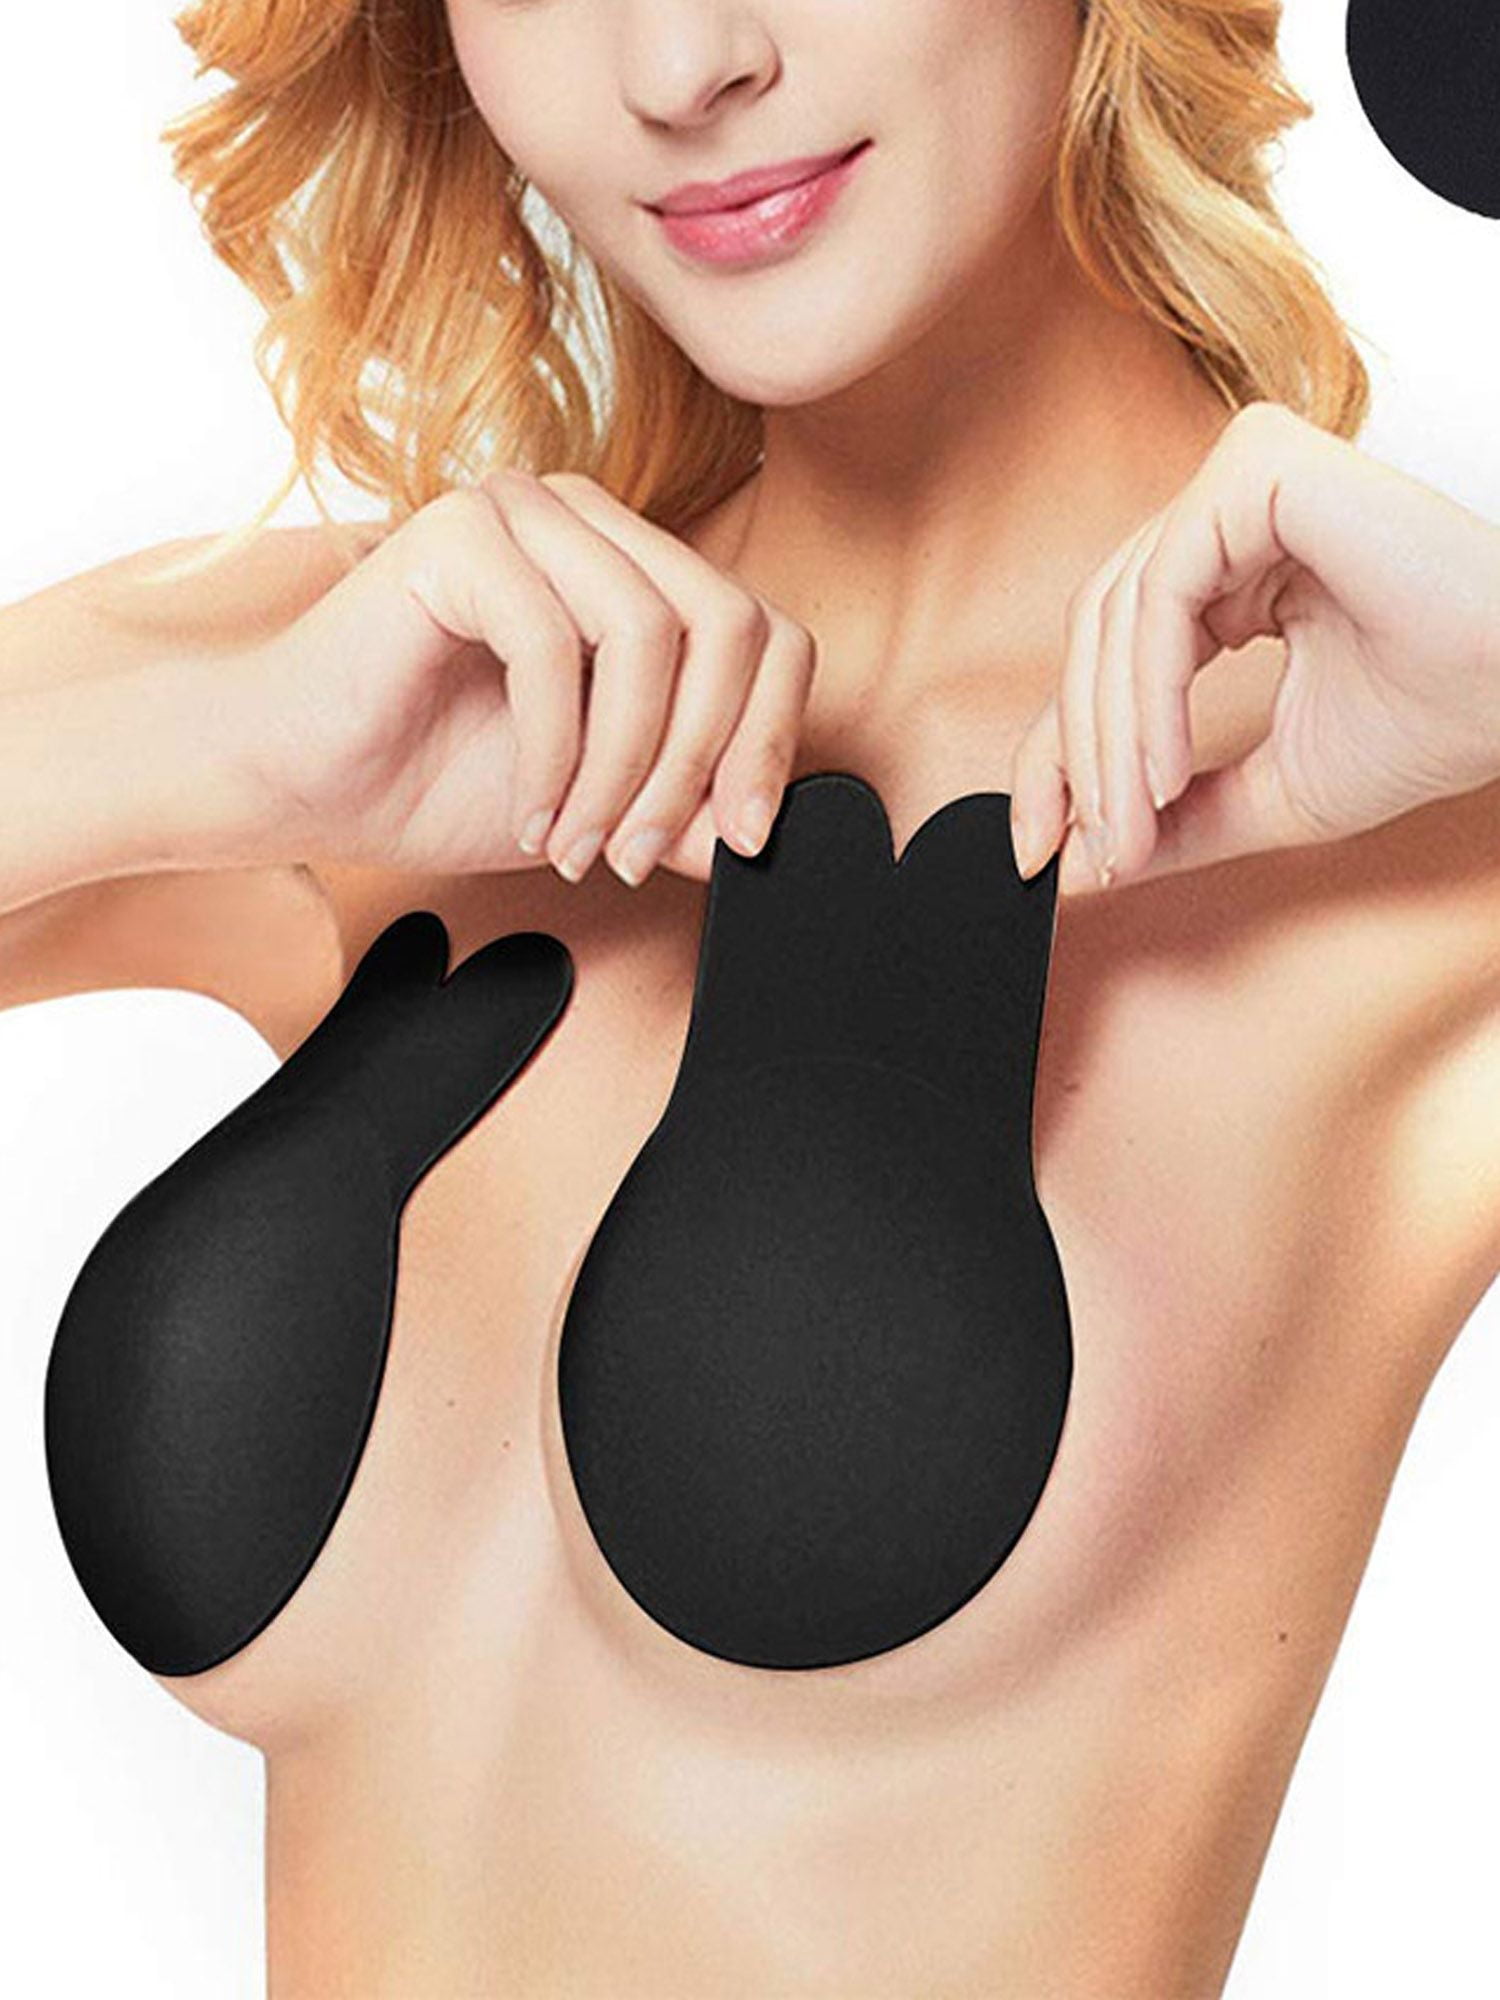 The New Style Has Arrived Wholesale Price Free Distribution Rabbit Ear Silicone Self Adhesive 